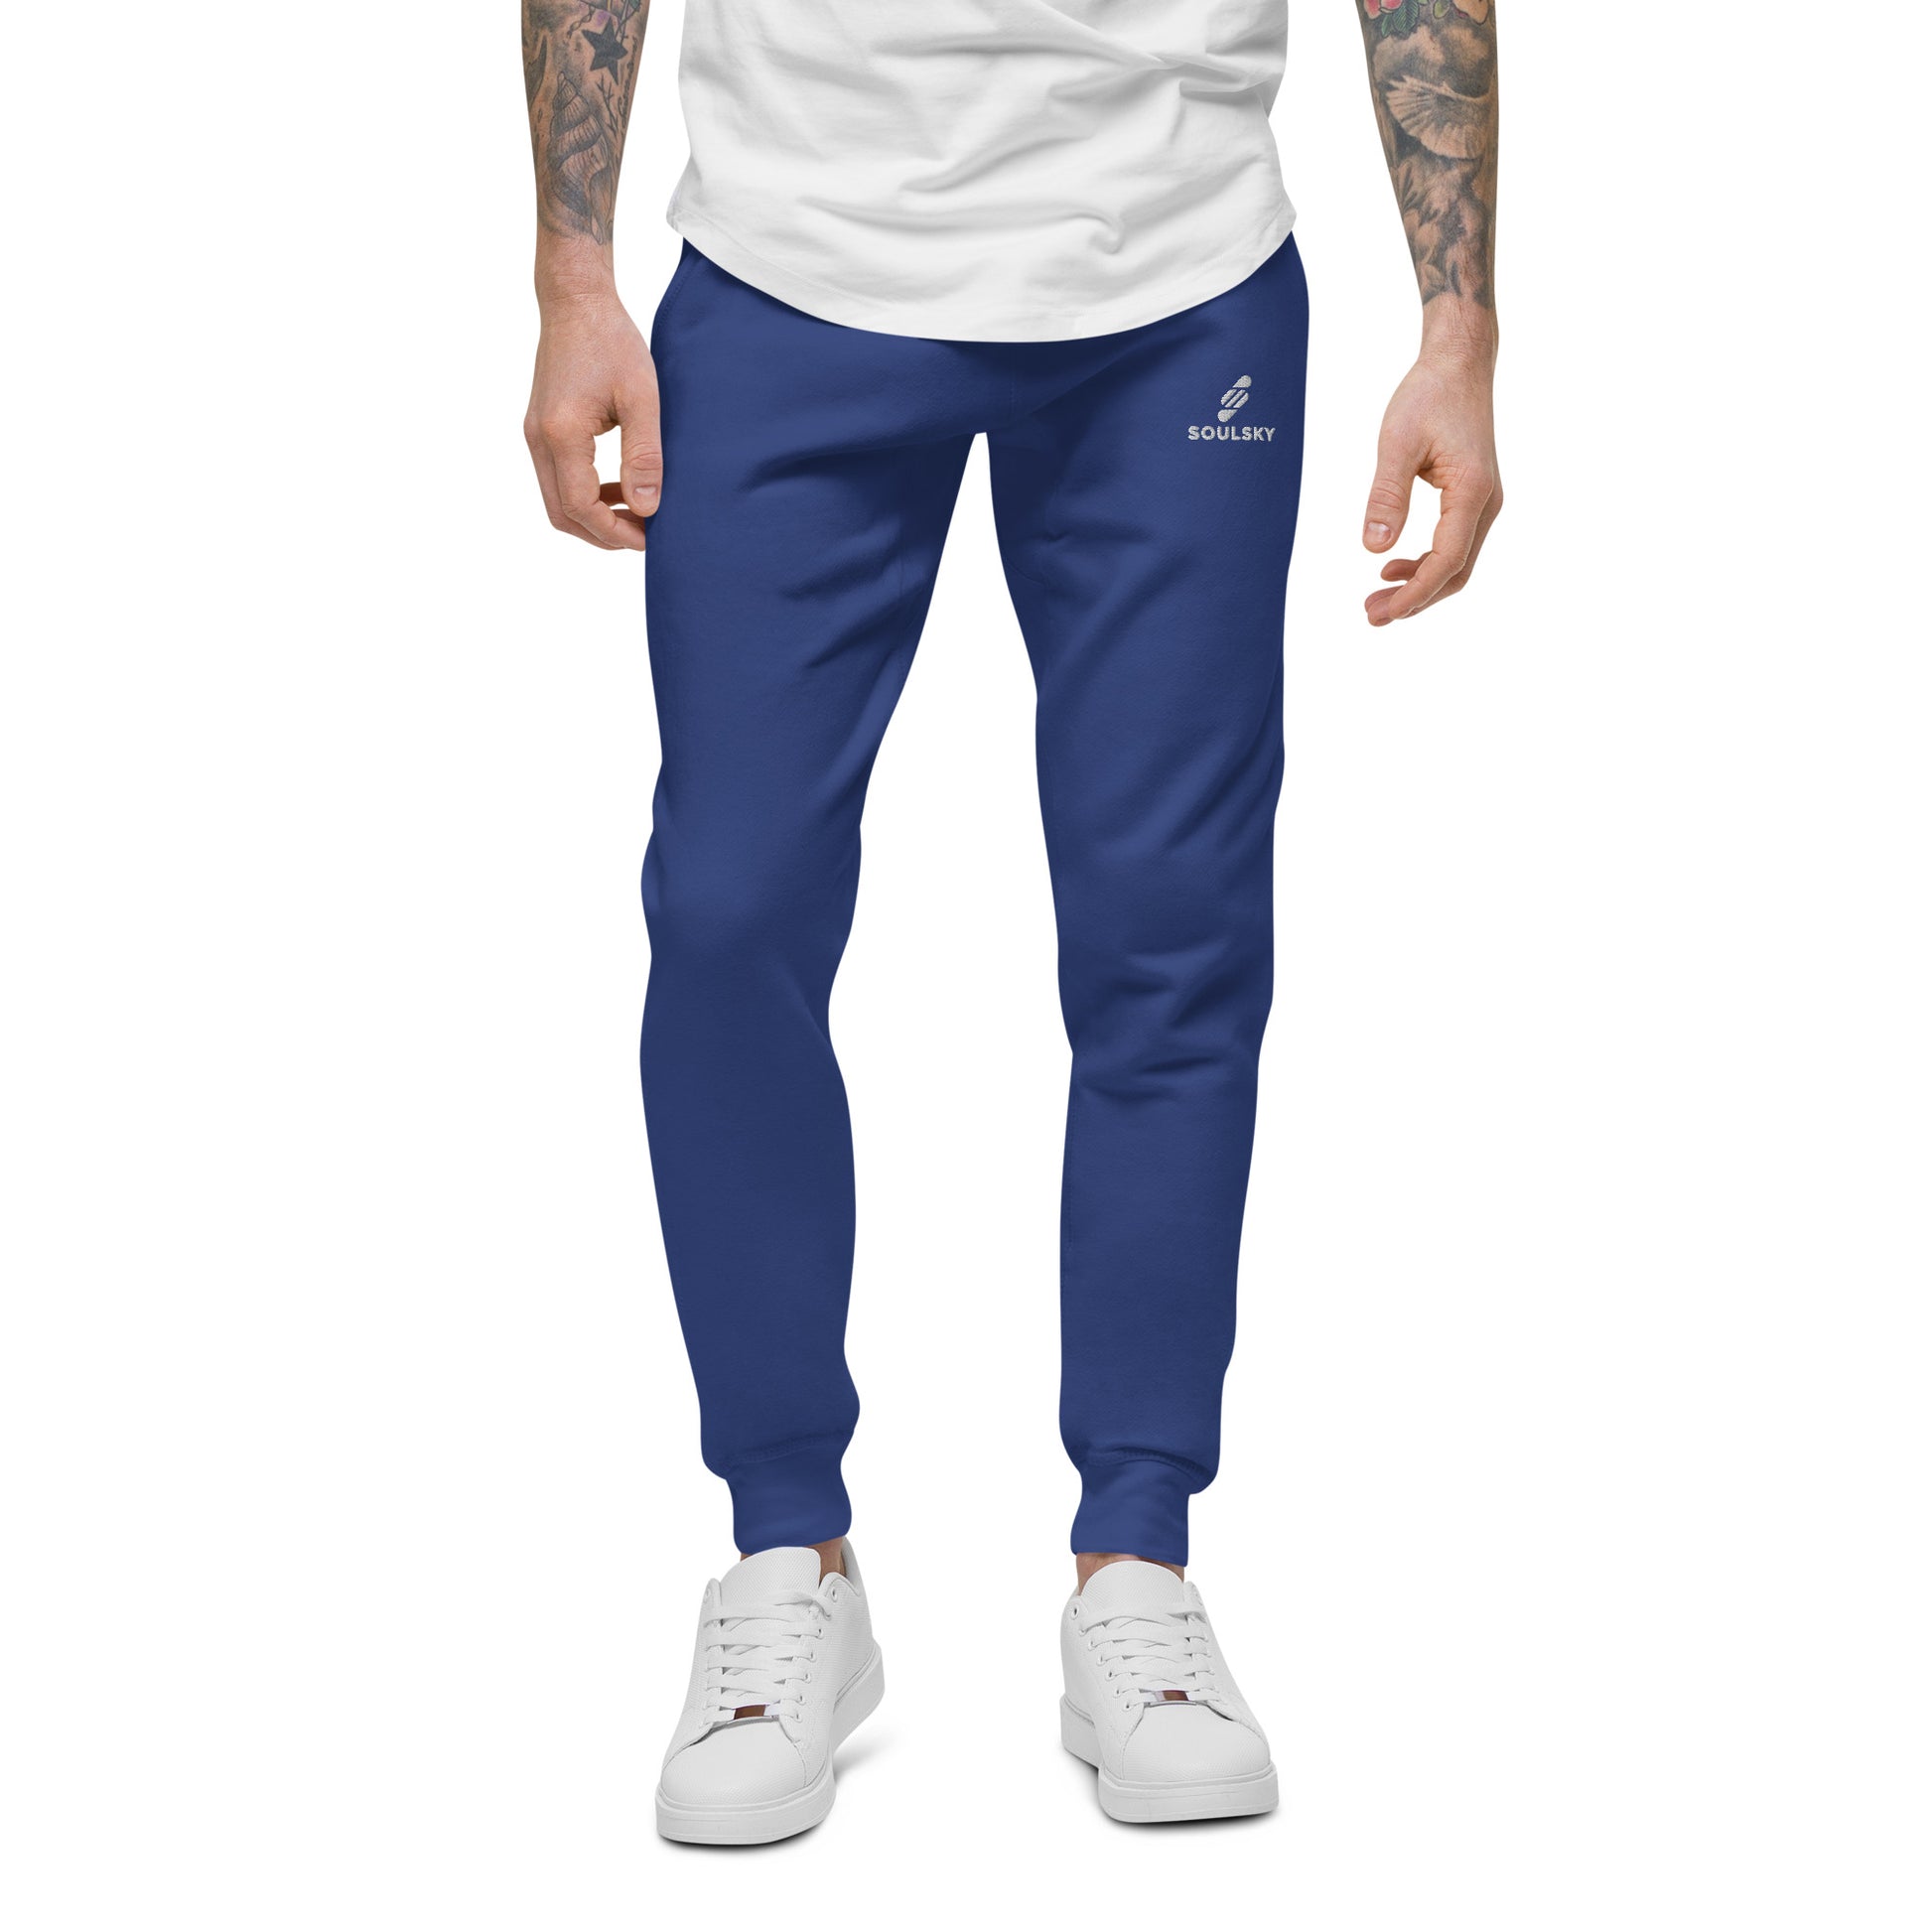 Male model wearing royal blue unisex joggers with white embroidered logo on left thigh that says "SOULSKY".